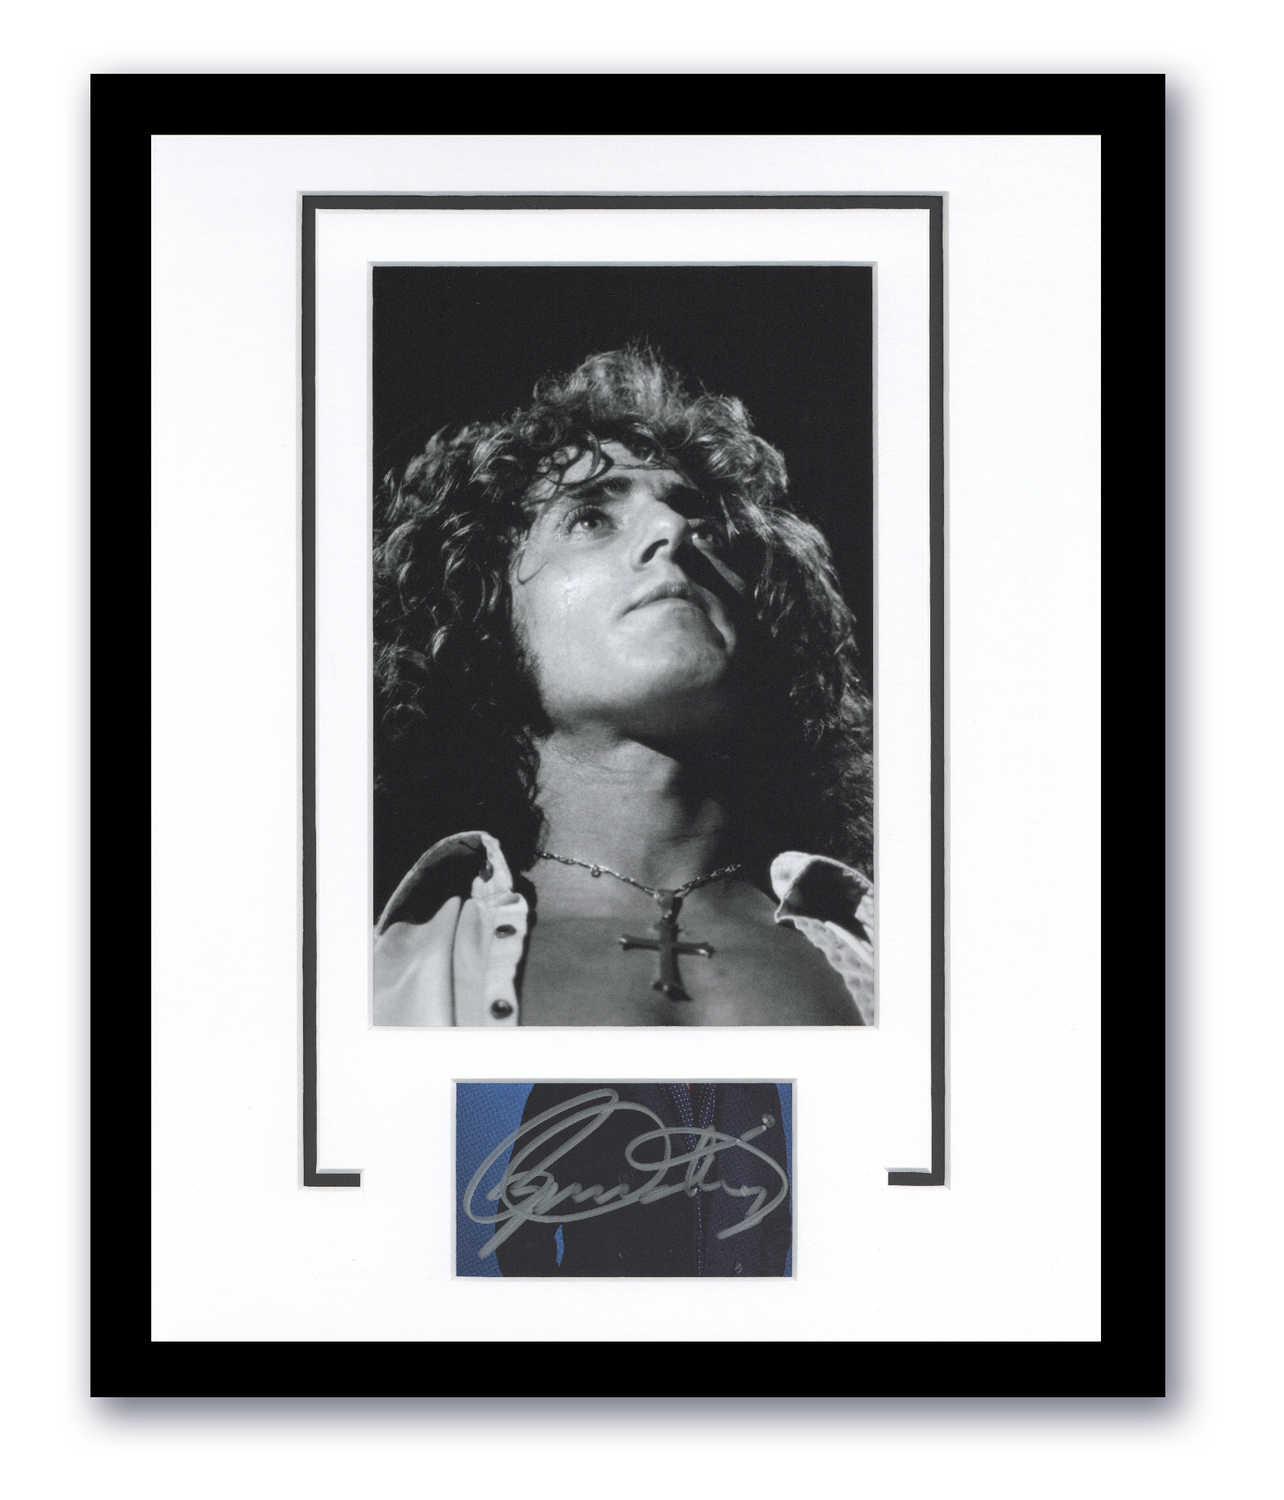 The Who Roger Daltrey Autographed Signed 11x14 Framed Who's Next Photo